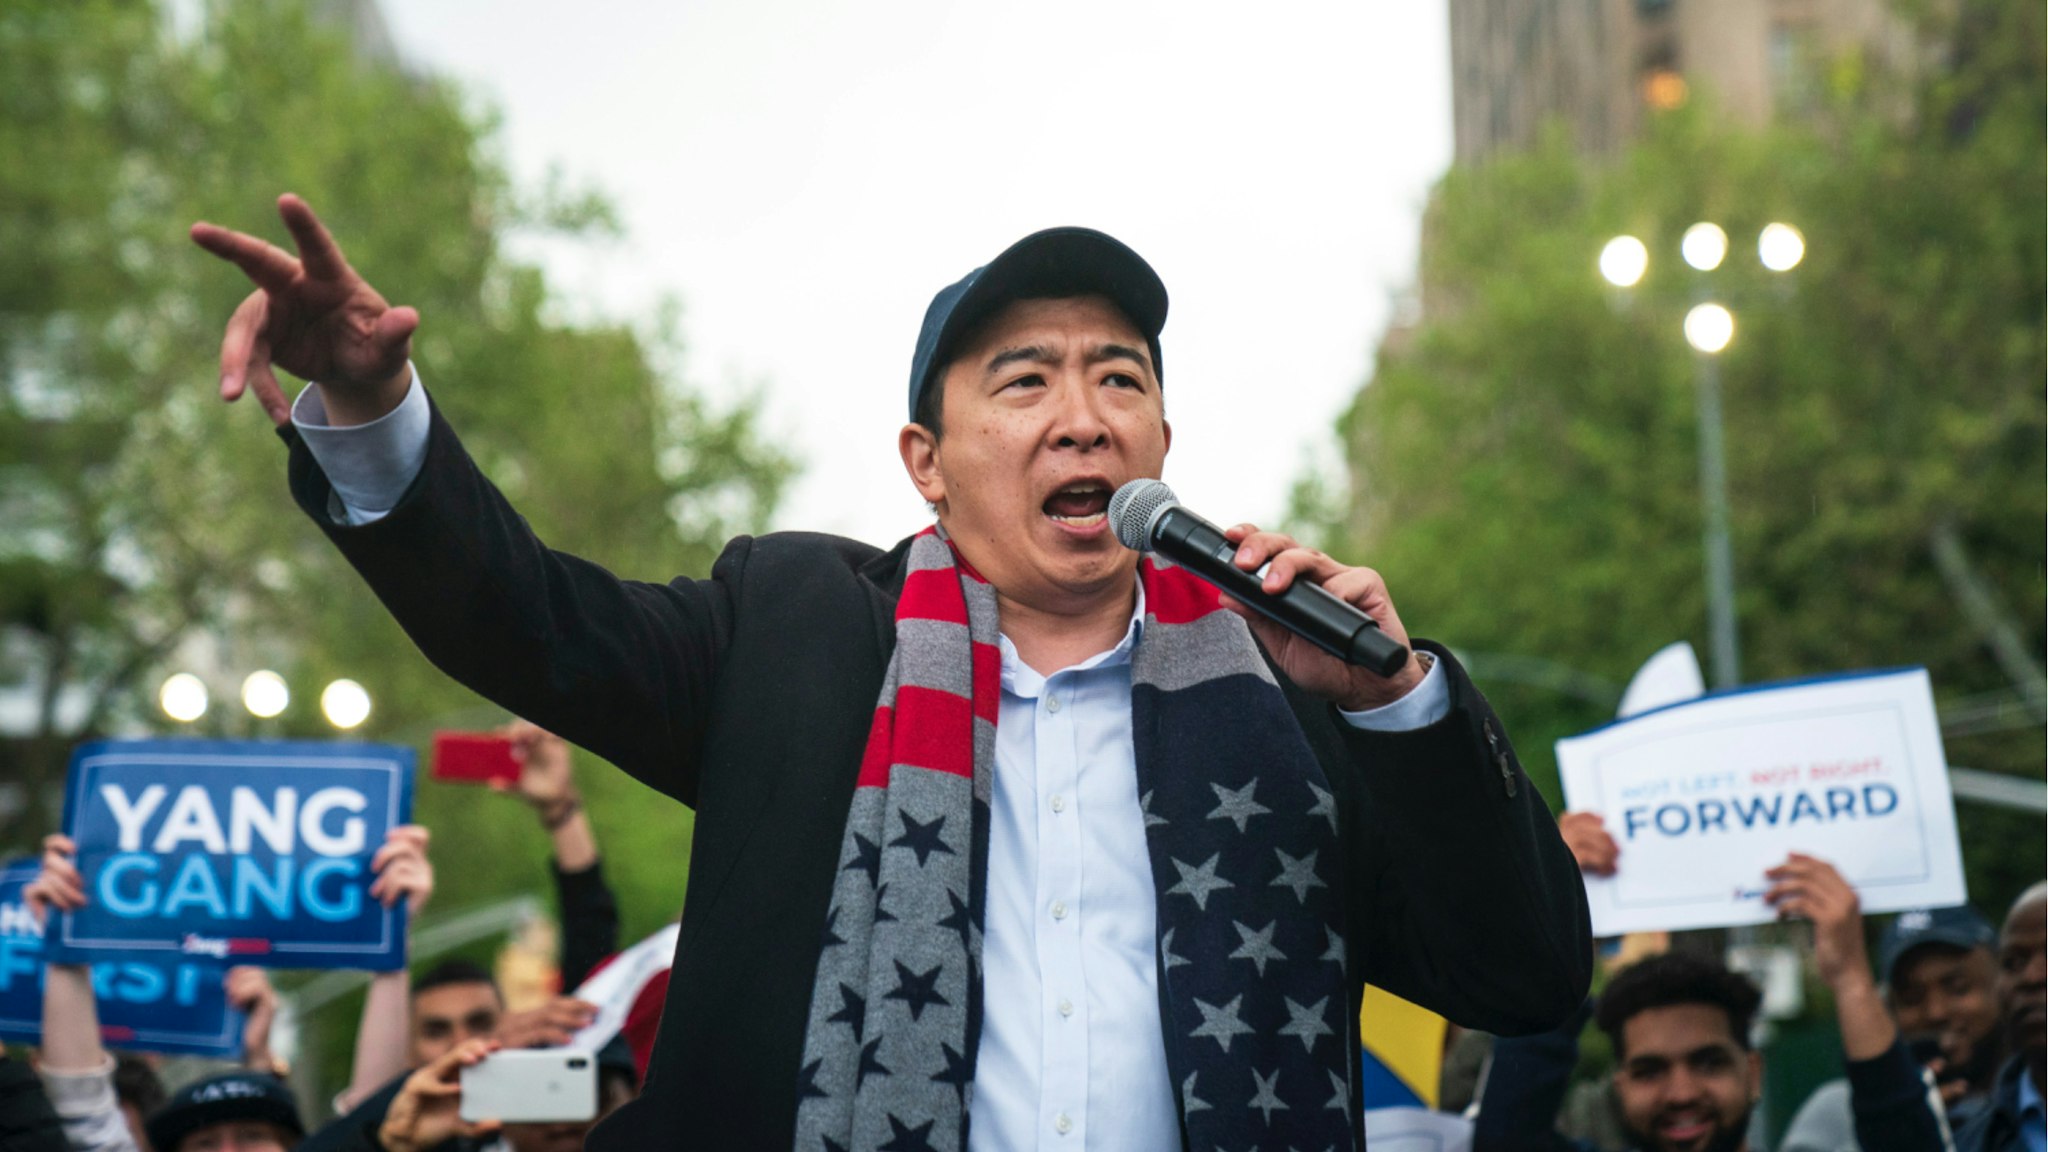 Democratic presidential candidate Andrew Yang speaks during a rally in Washington Square Park, May 14, 2019 in New York City.